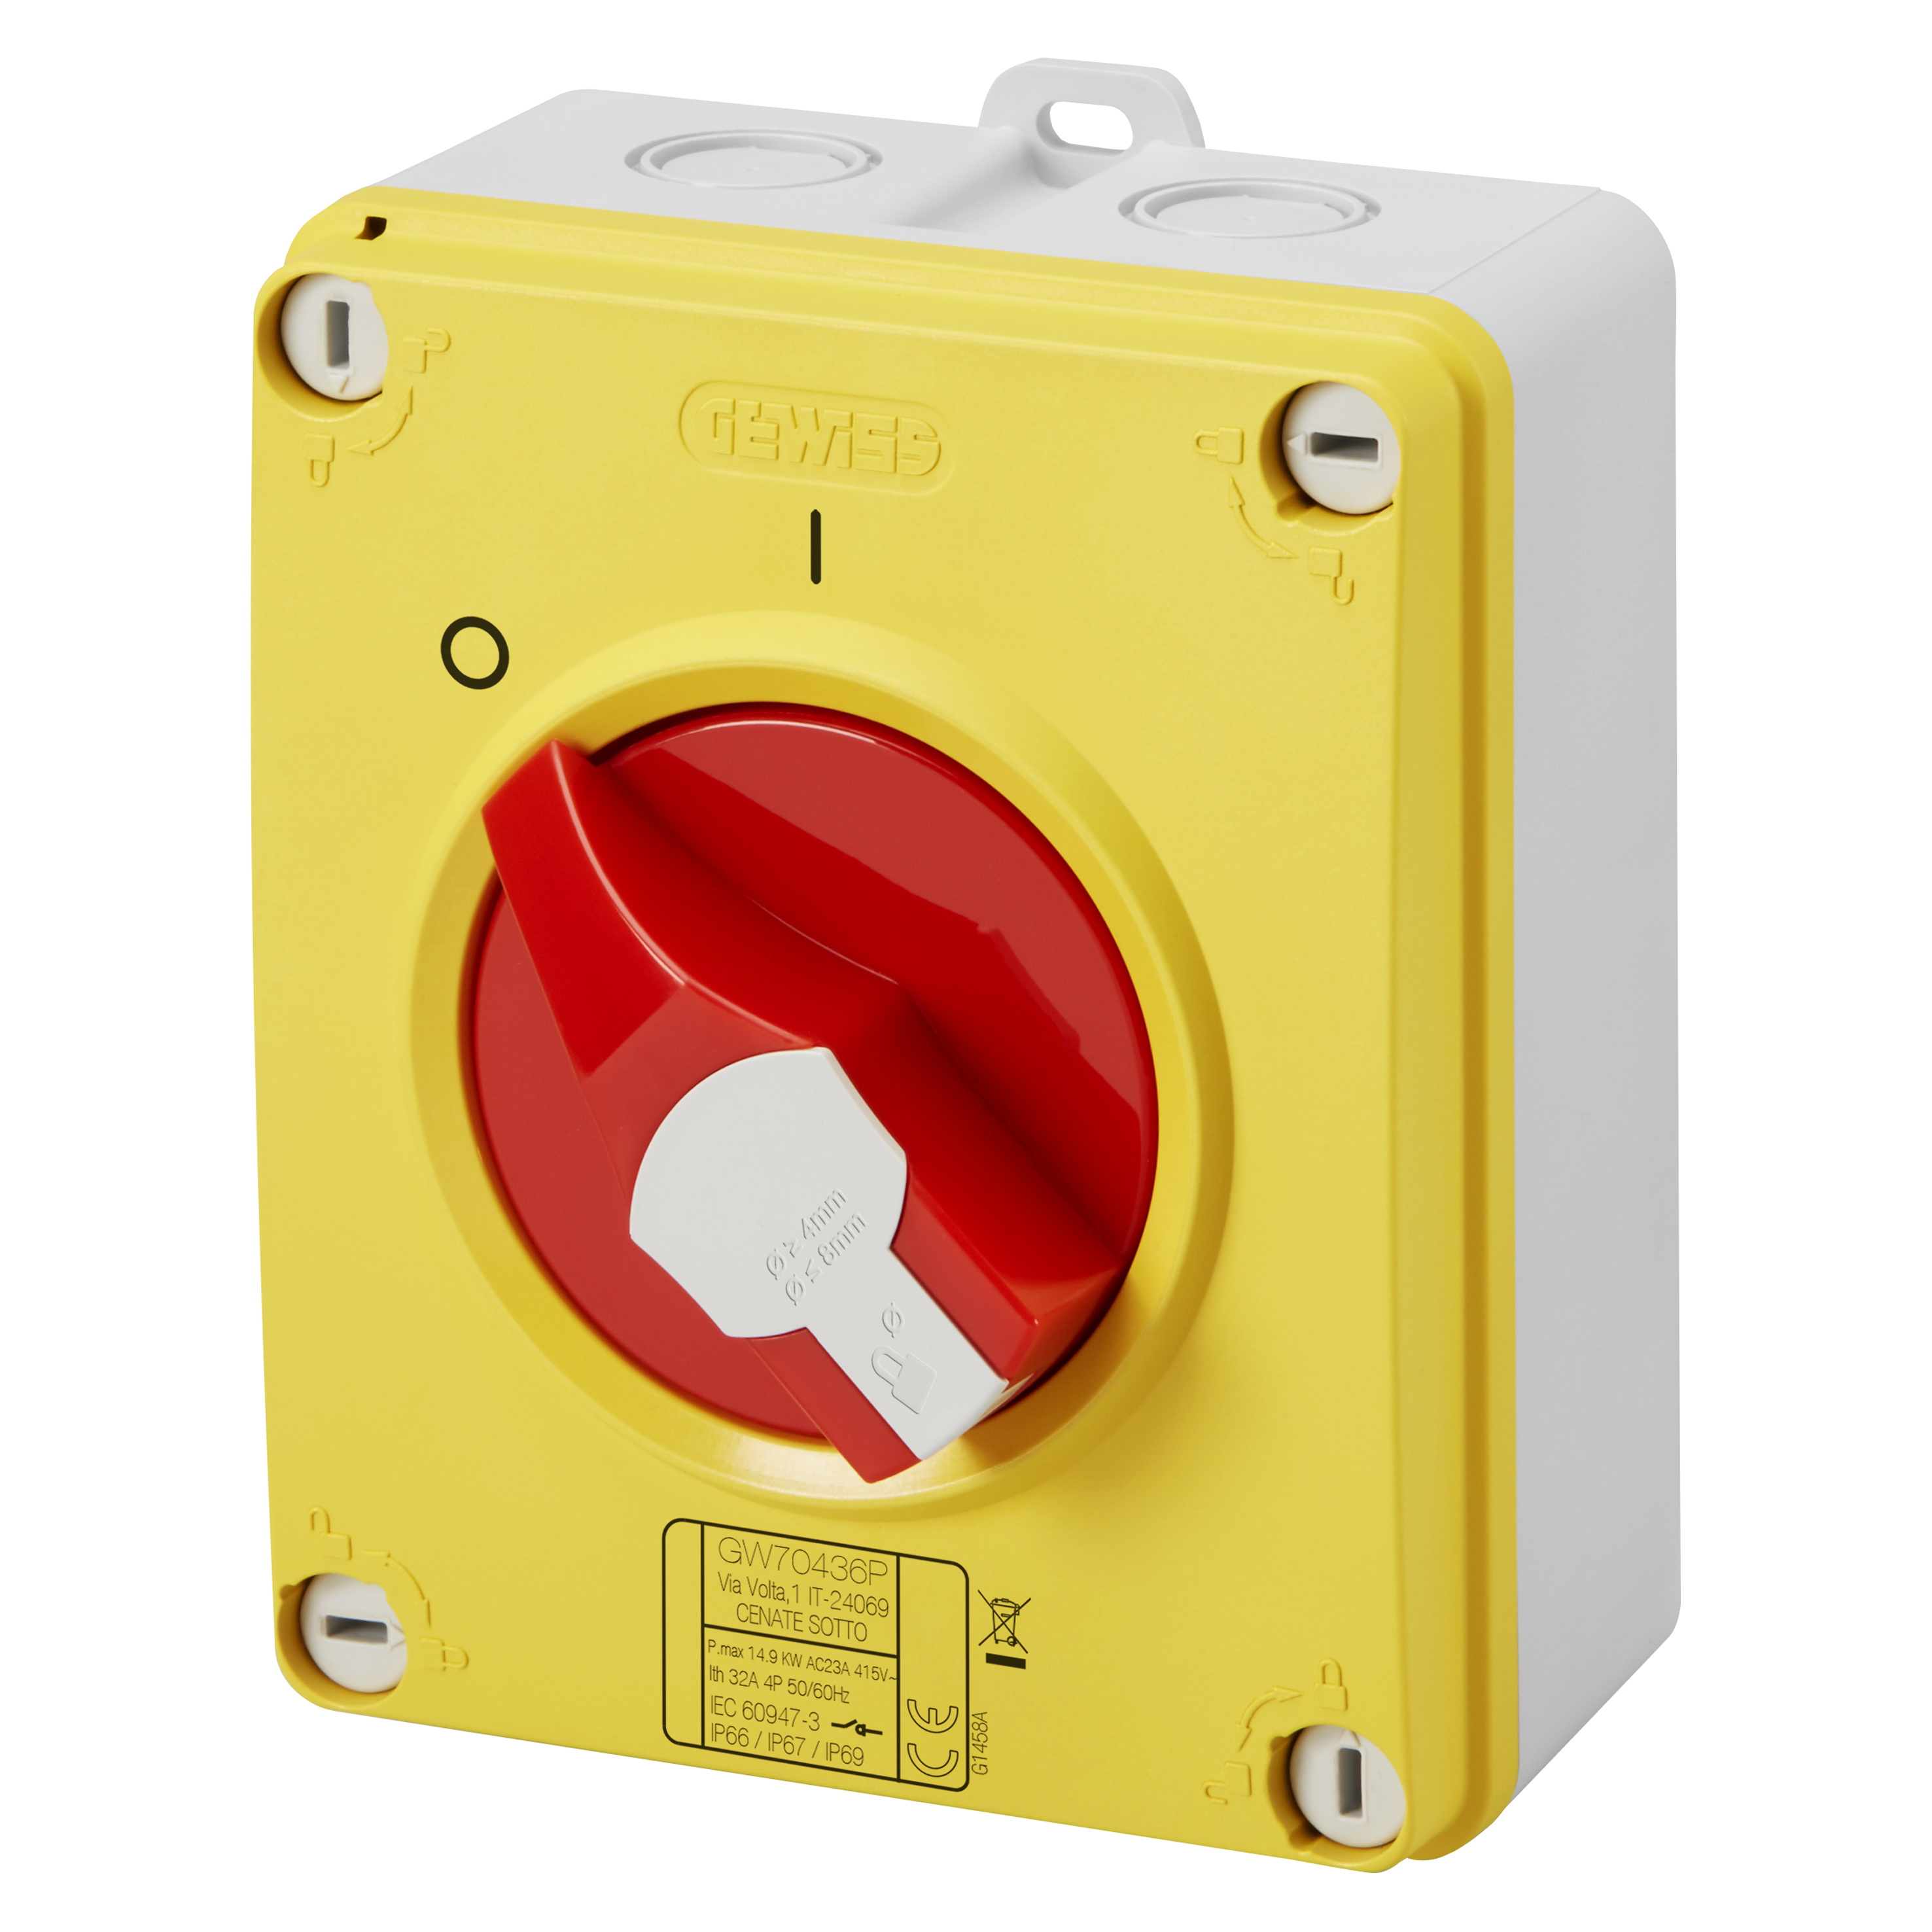 GW70435P Isolator - HP - Emergency - Isolating Material Box - 32A 3P - Lockable Red Knob - IP66/67/69